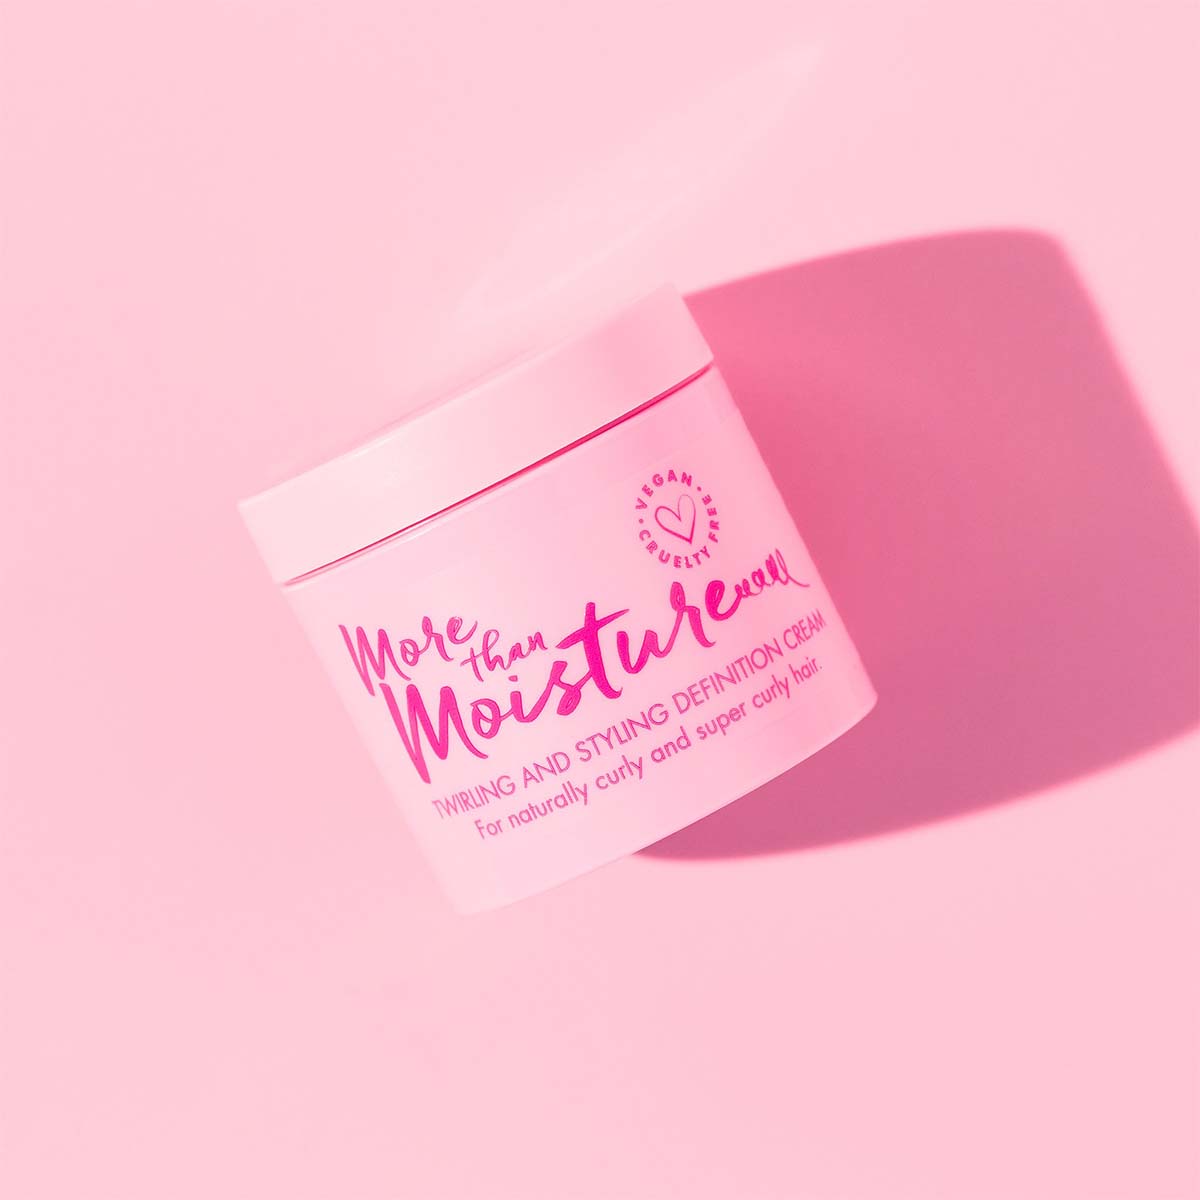 More Than Moisture Vegan Twirling And Styling Definition Cream